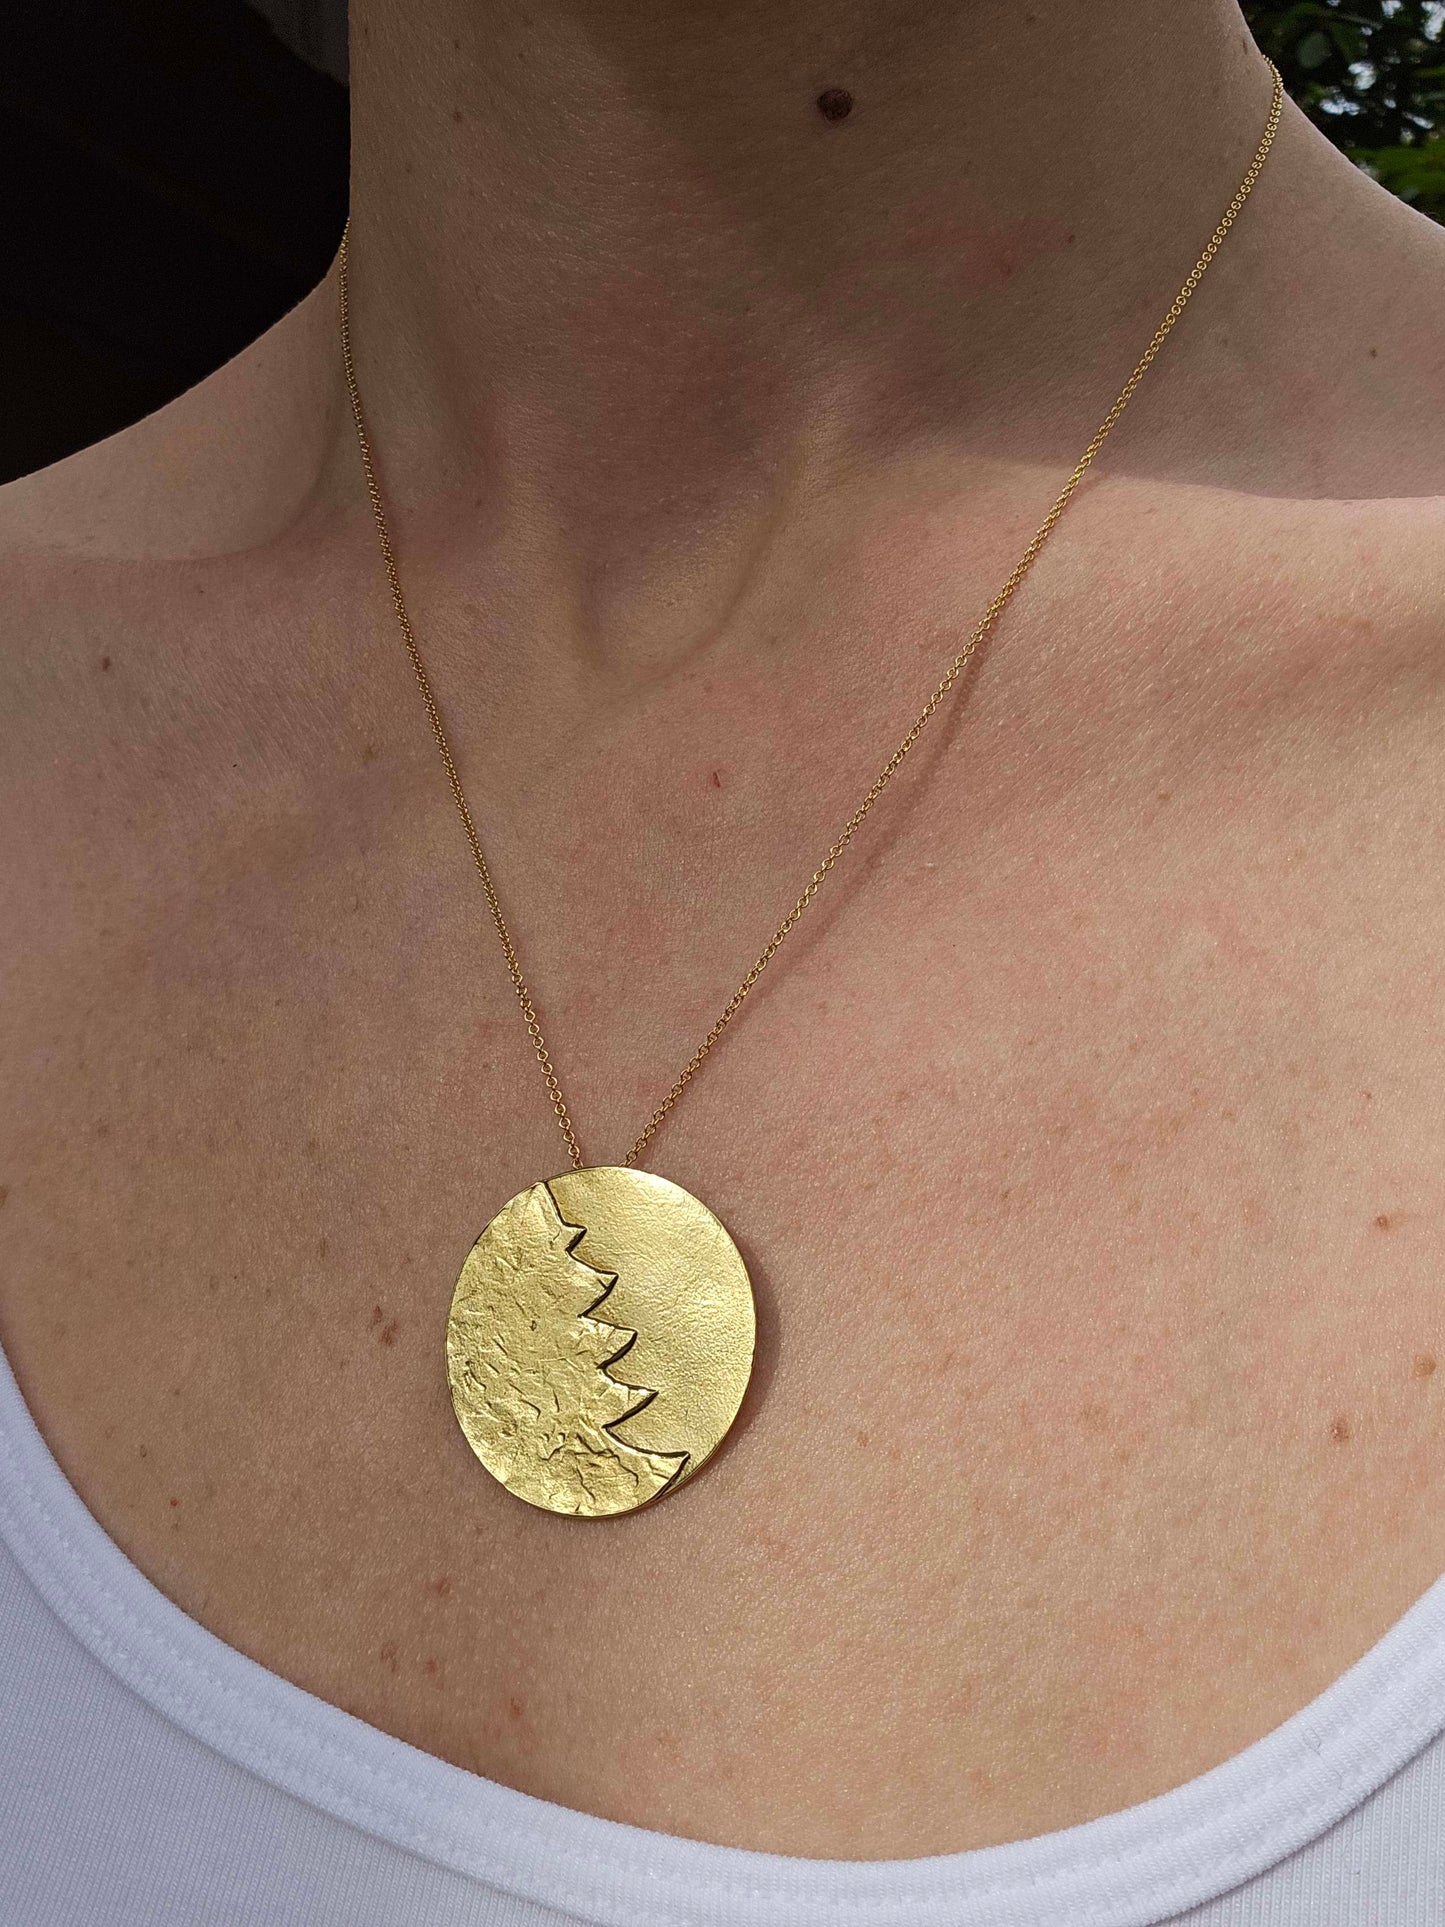 Meaningful Gold Christmas Tree Necklace